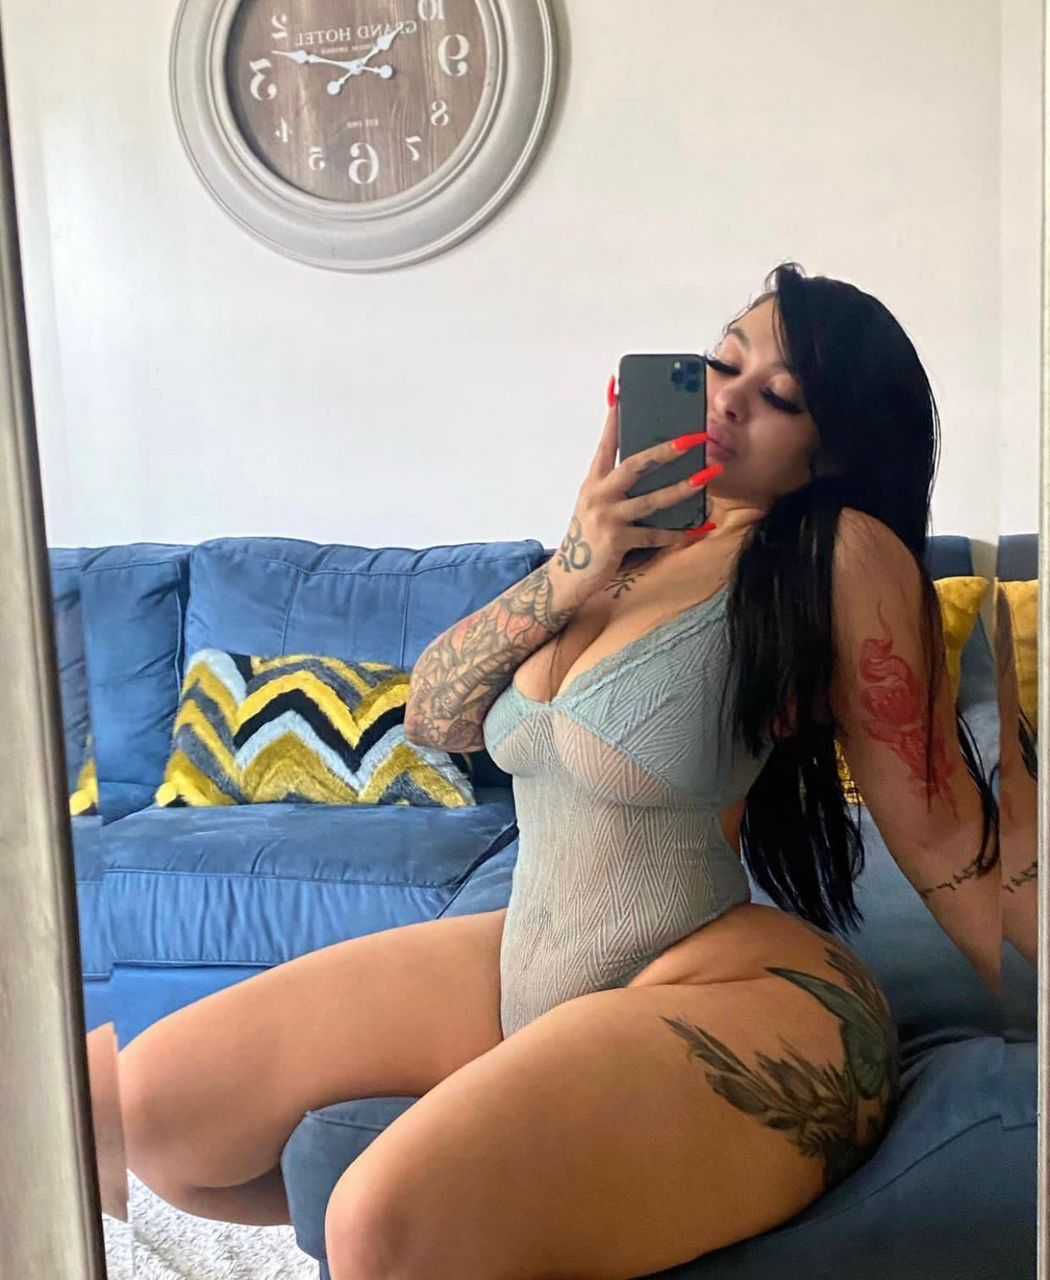 Escorts San Bernardino, California ✅ I Am Available Now💦I do Facetime Fun And video🥰Pic Selling At Low Rate💝Incall Or☎Outcall🚗CarFun😋Home🏨Hotel✅Available / Snapchat :: Vanessa_vane